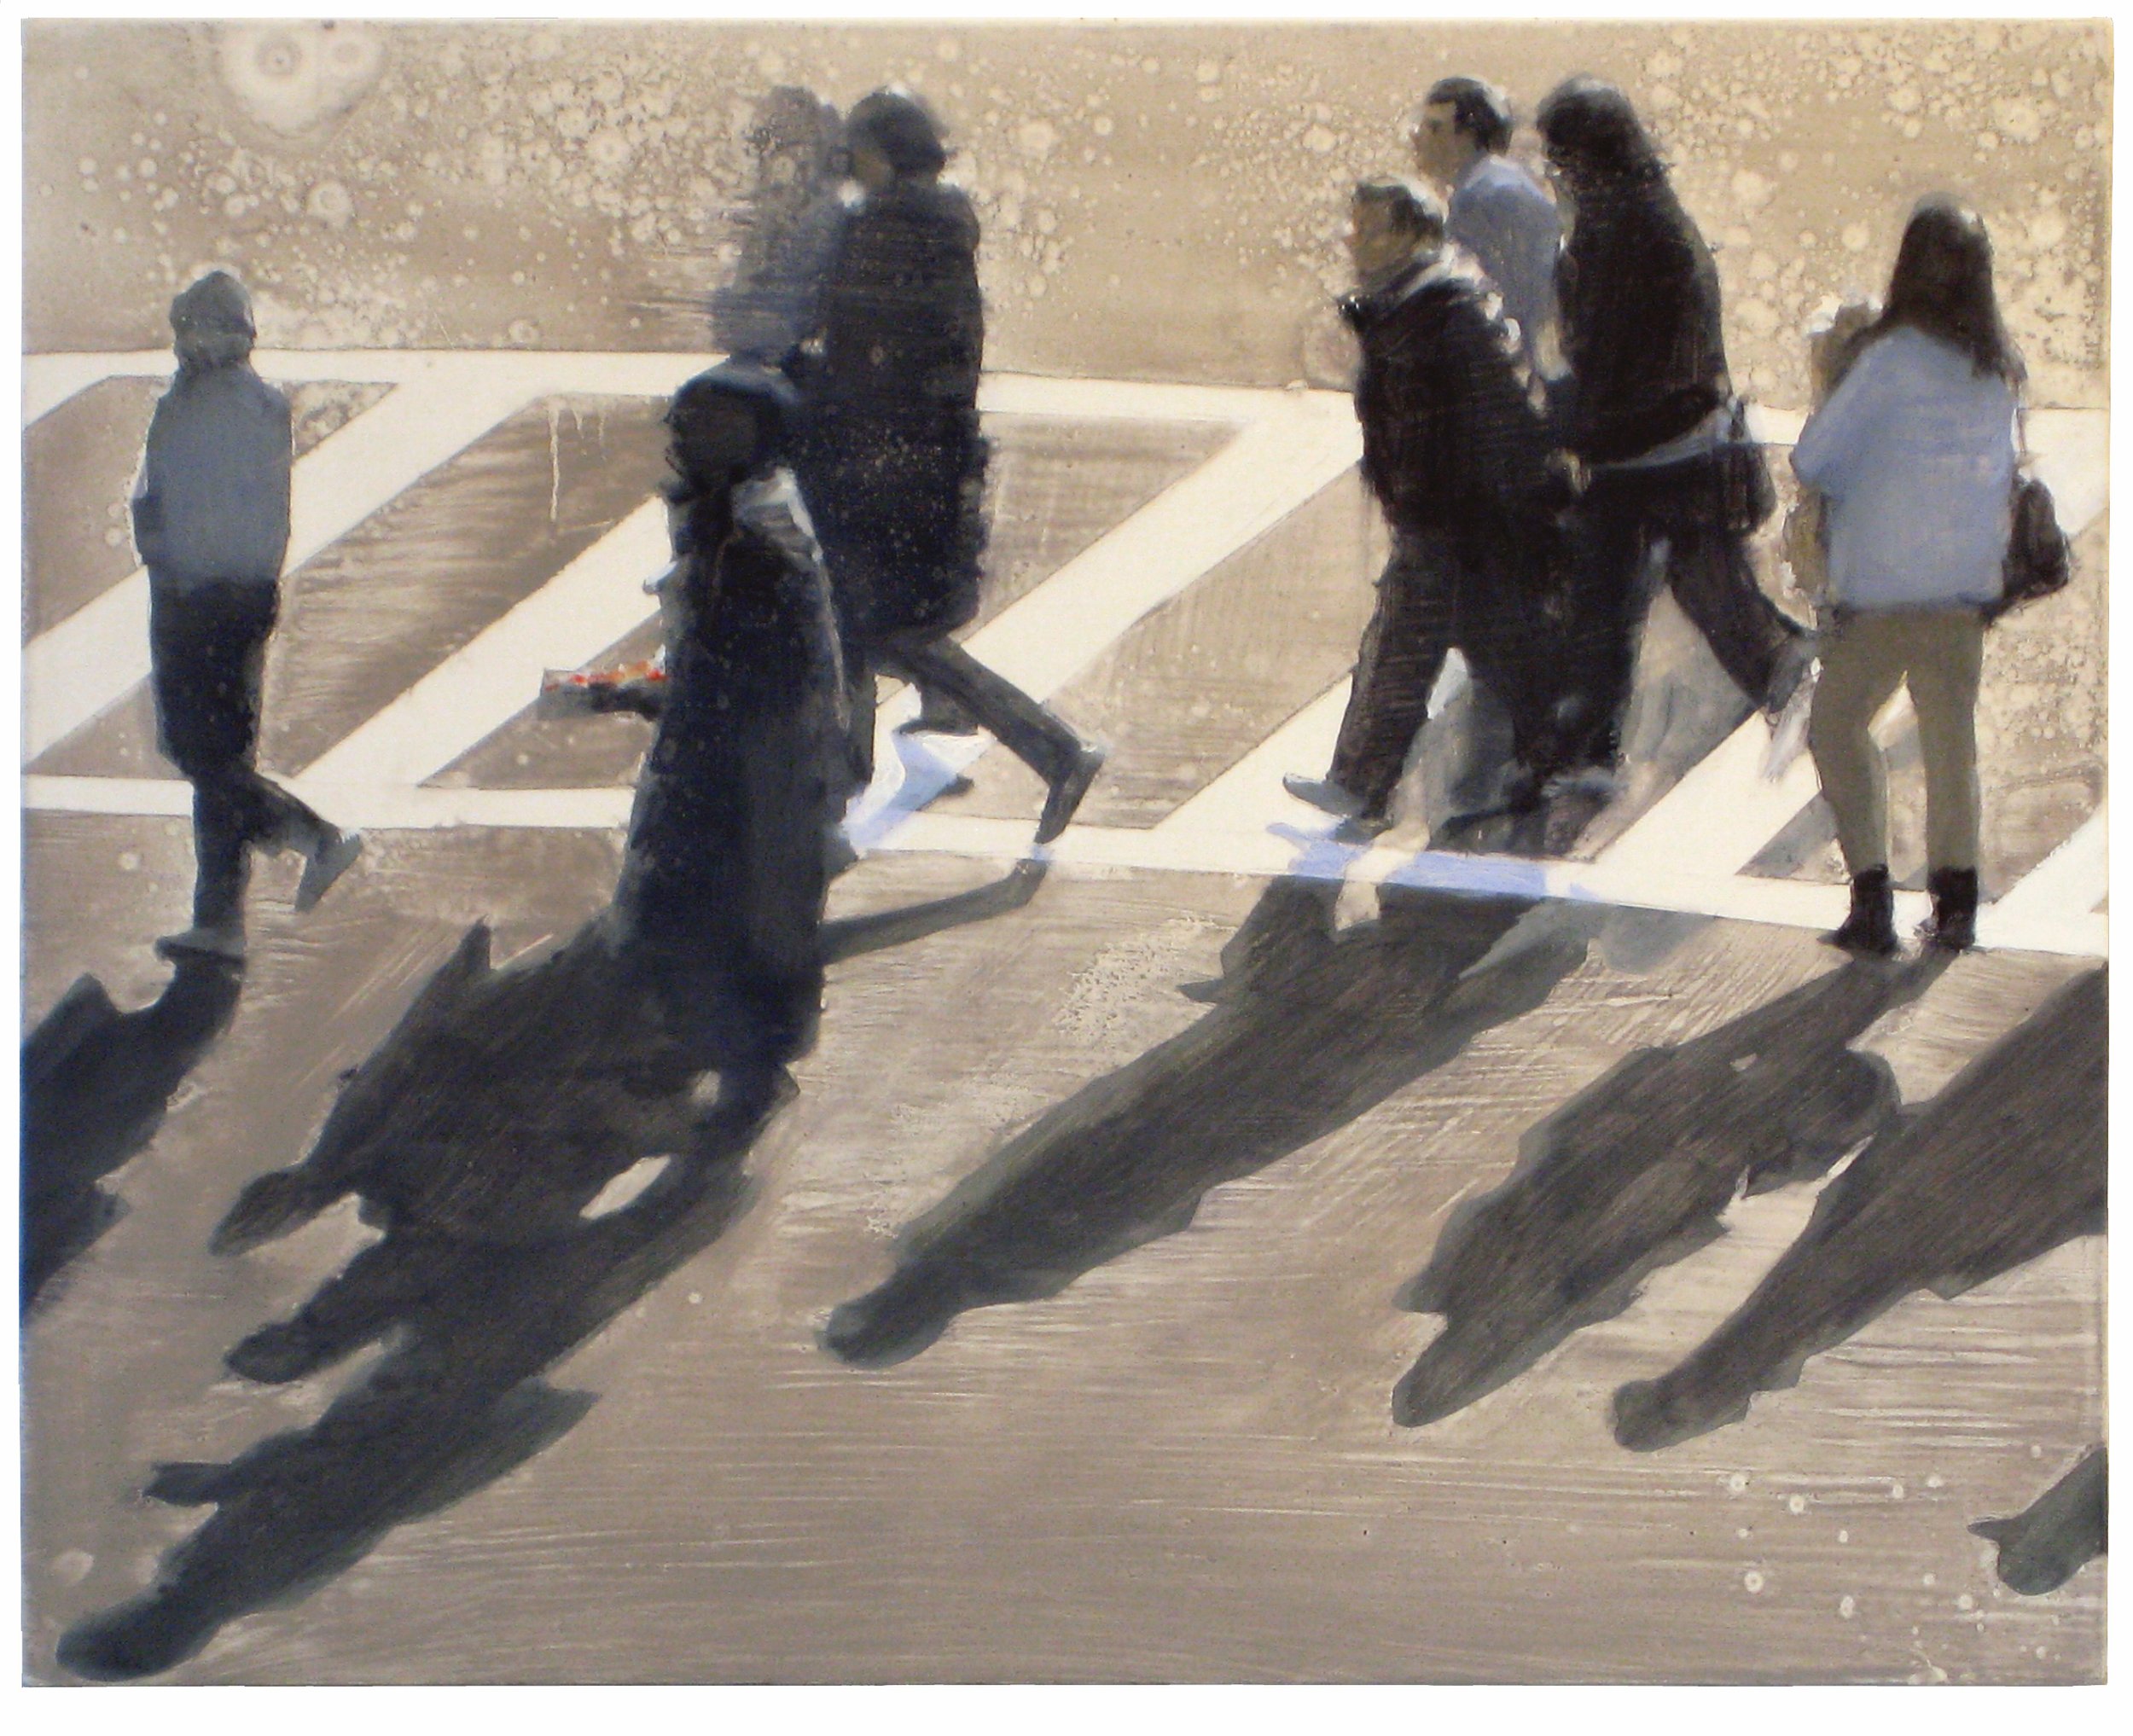  Crossing the Bowery 2 20x25 inches (51x63cm) Oil on linen 2010 